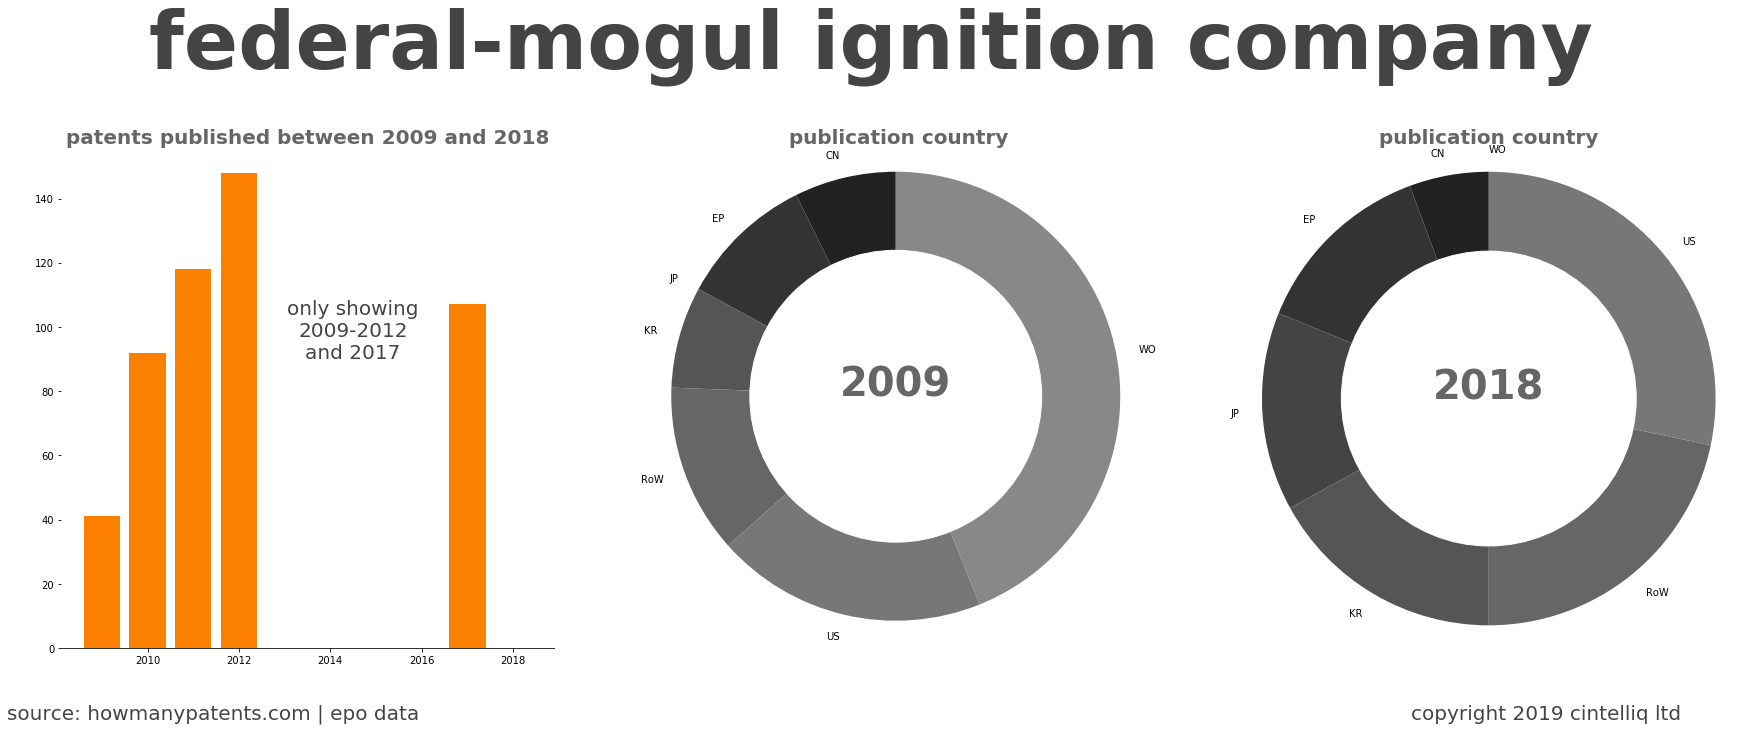 summary of patents for Federal-Mogul Ignition Company